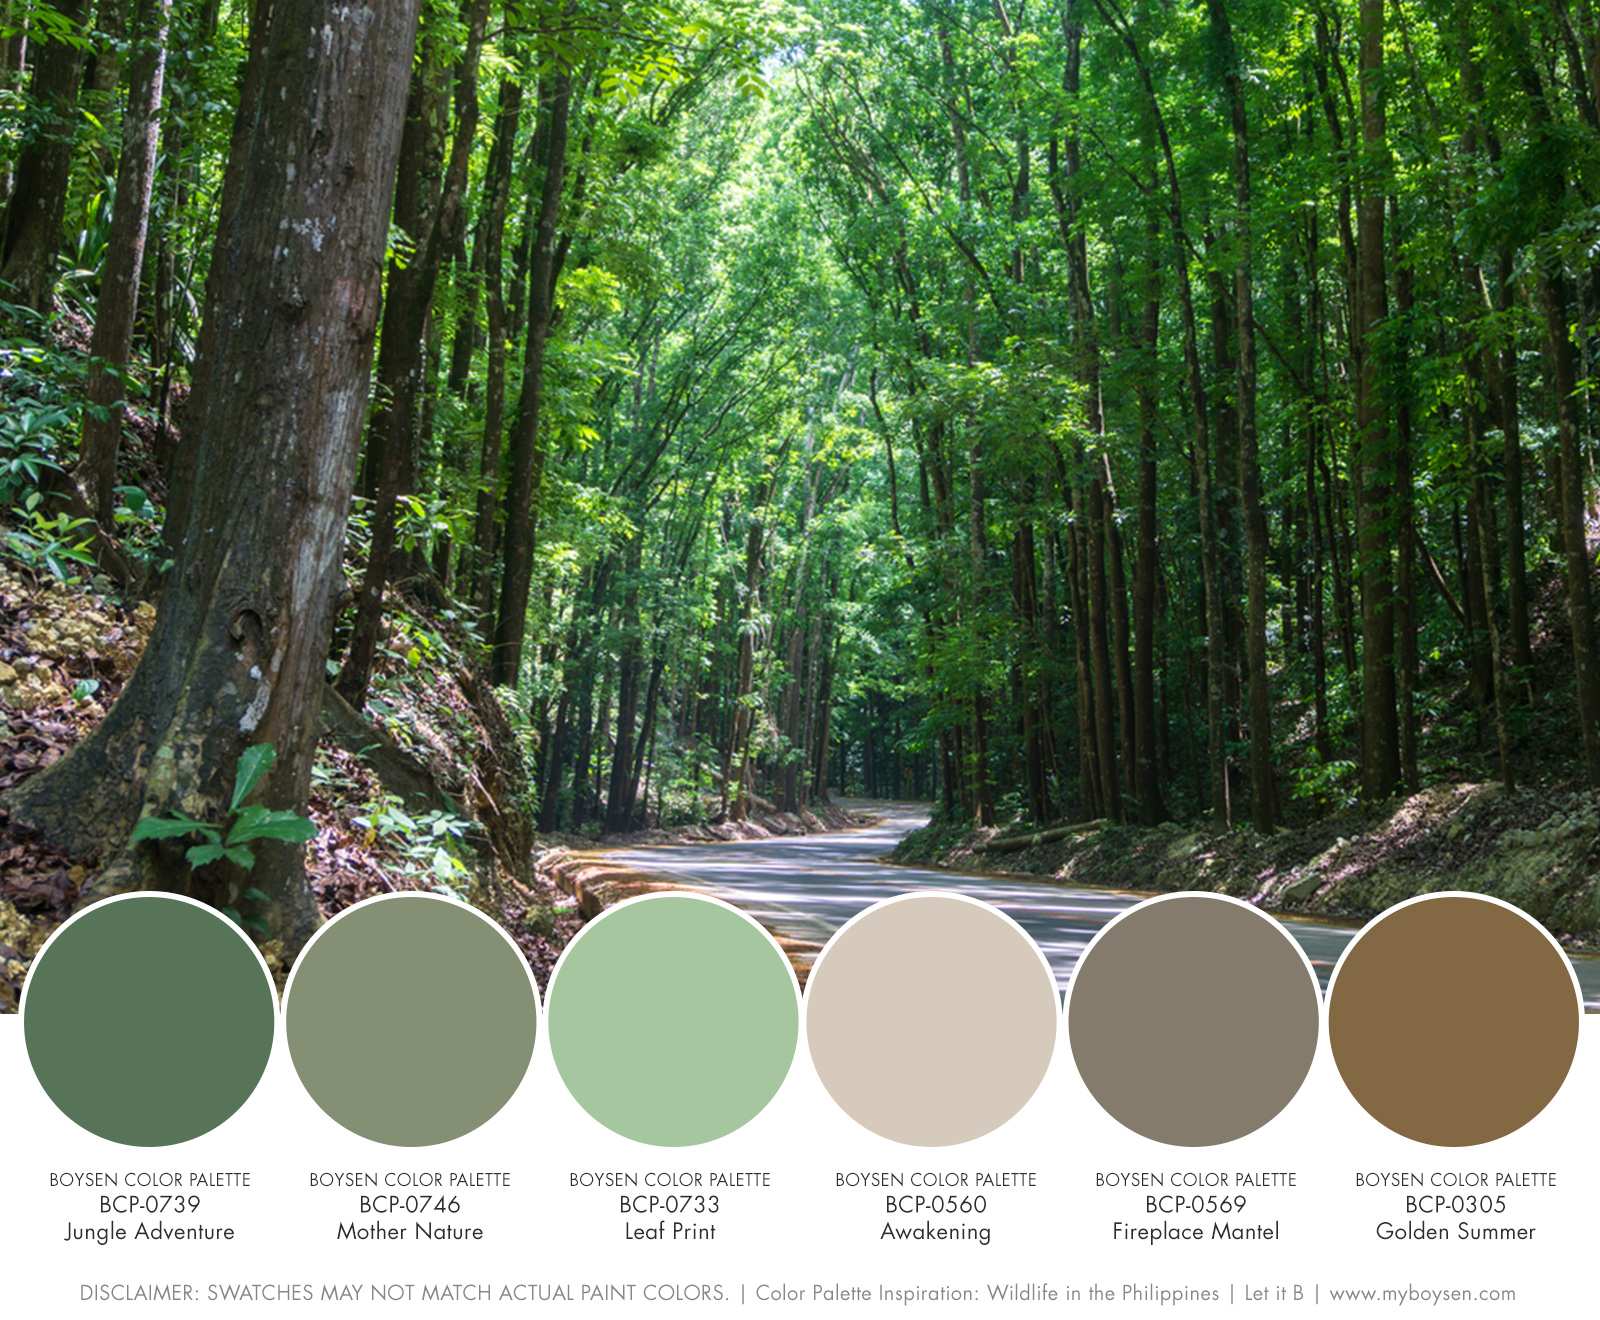  Color Palette Inspiration: Wildlife in the Philippines | MyBoysen